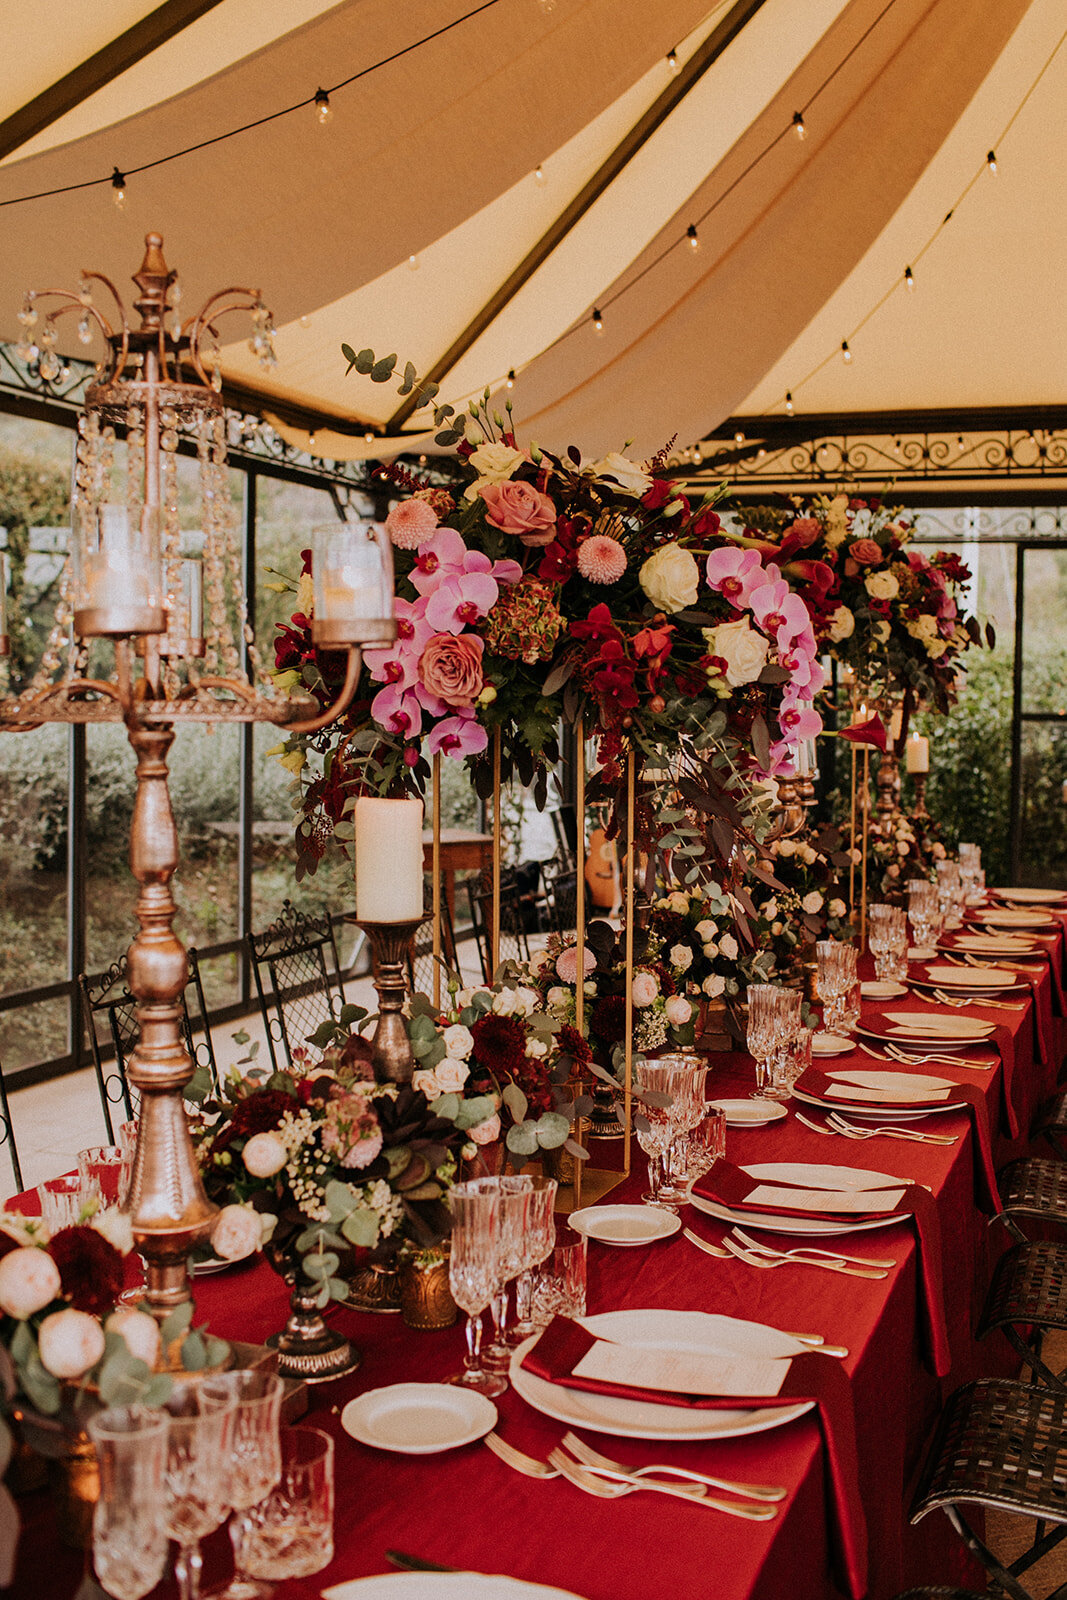 Tall centrepieces and candelabras